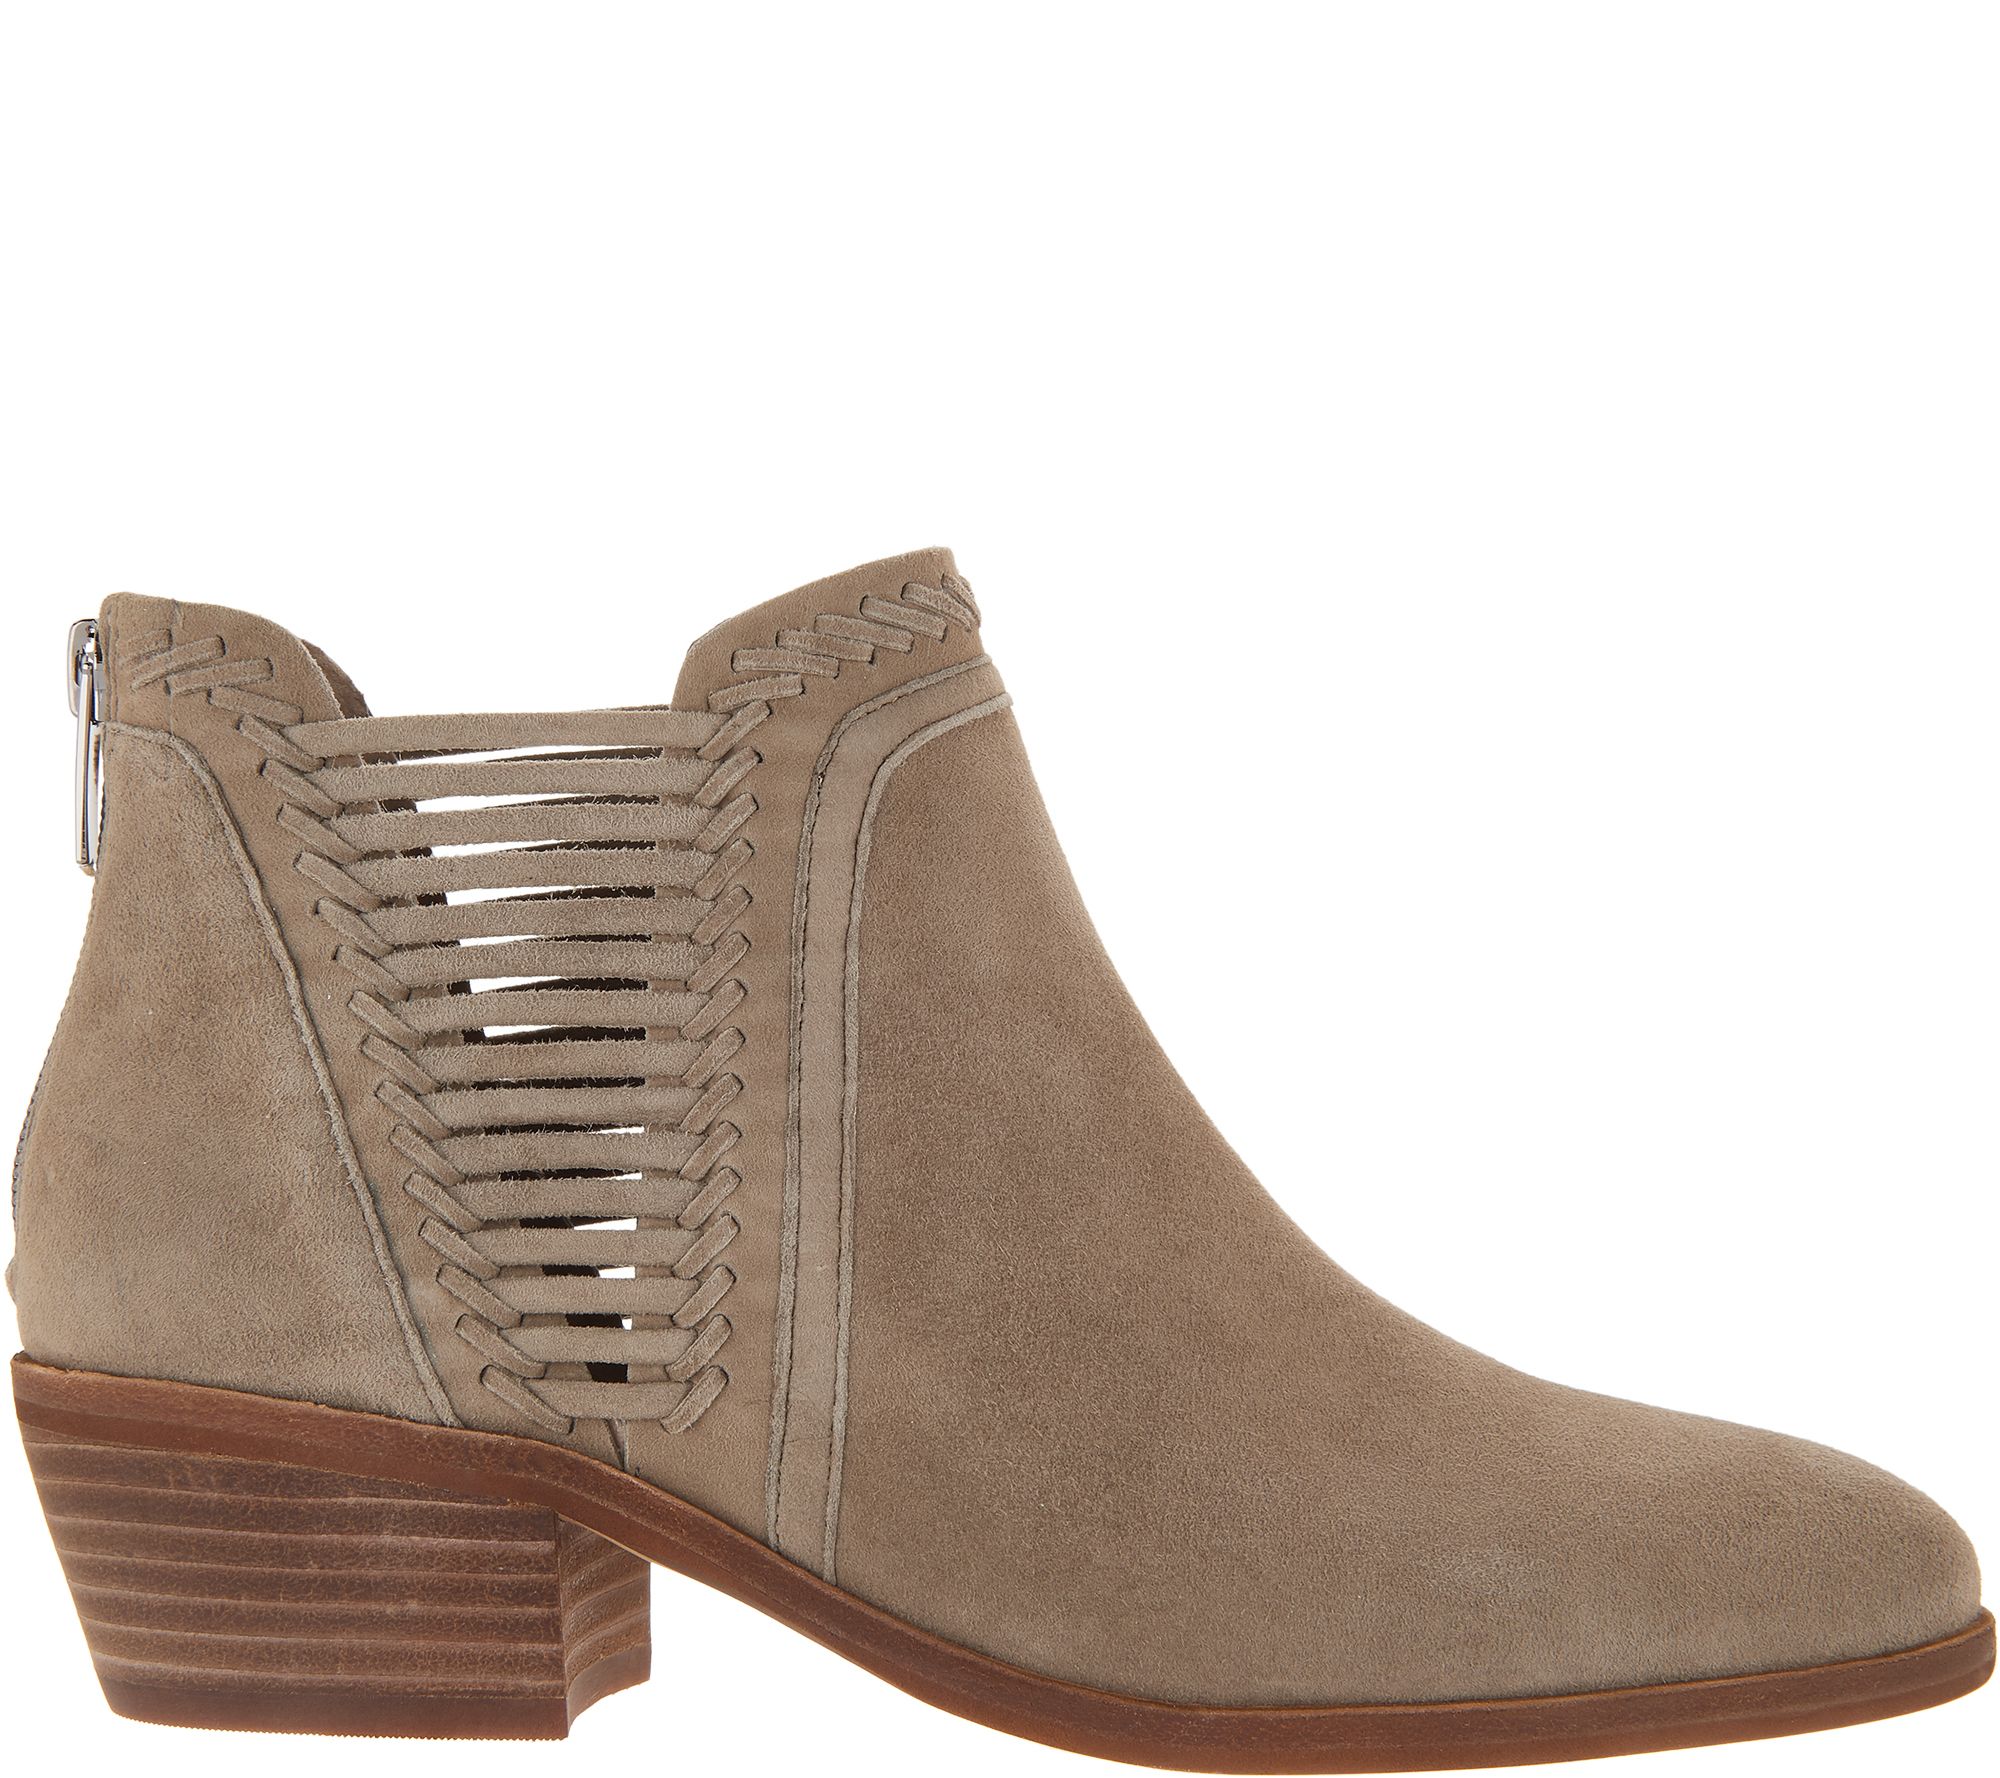 vince camuto women's ankle boots